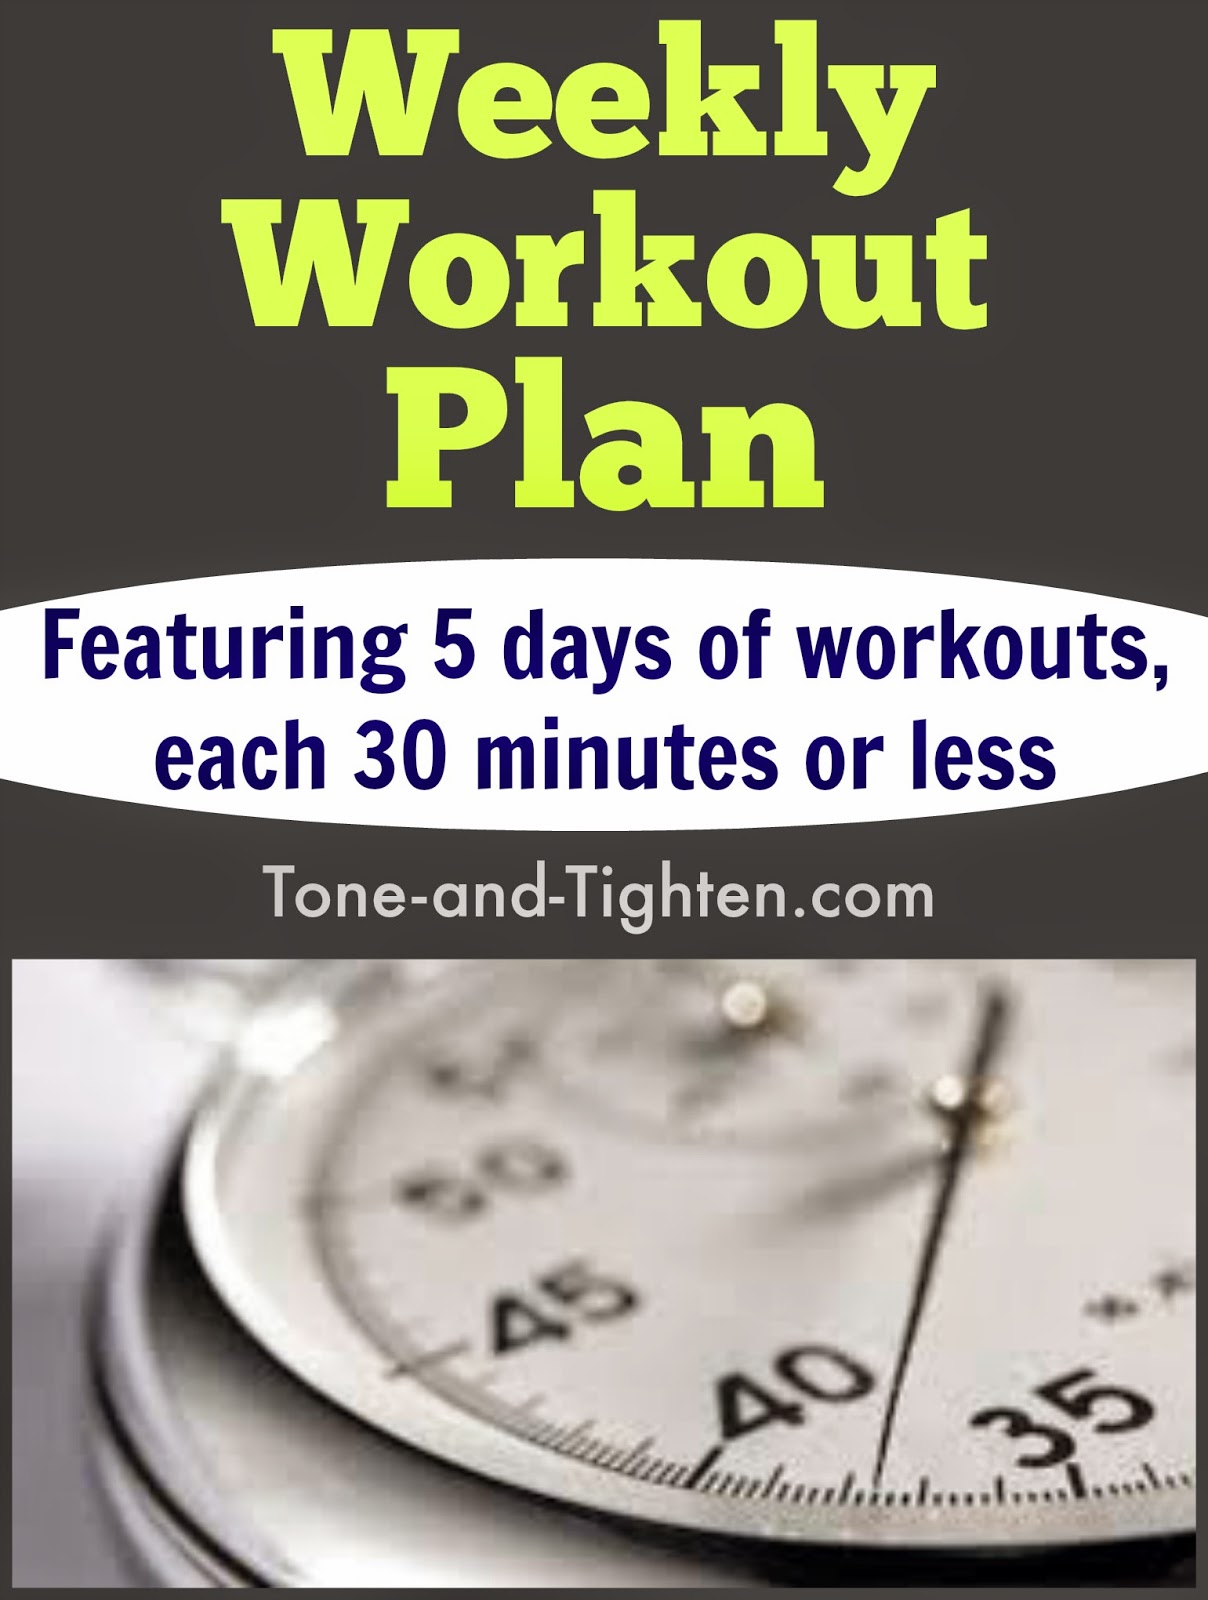 Weekly Workout Plan – The Best Of Our Quick Workouts – 30 Minutes Or Less!